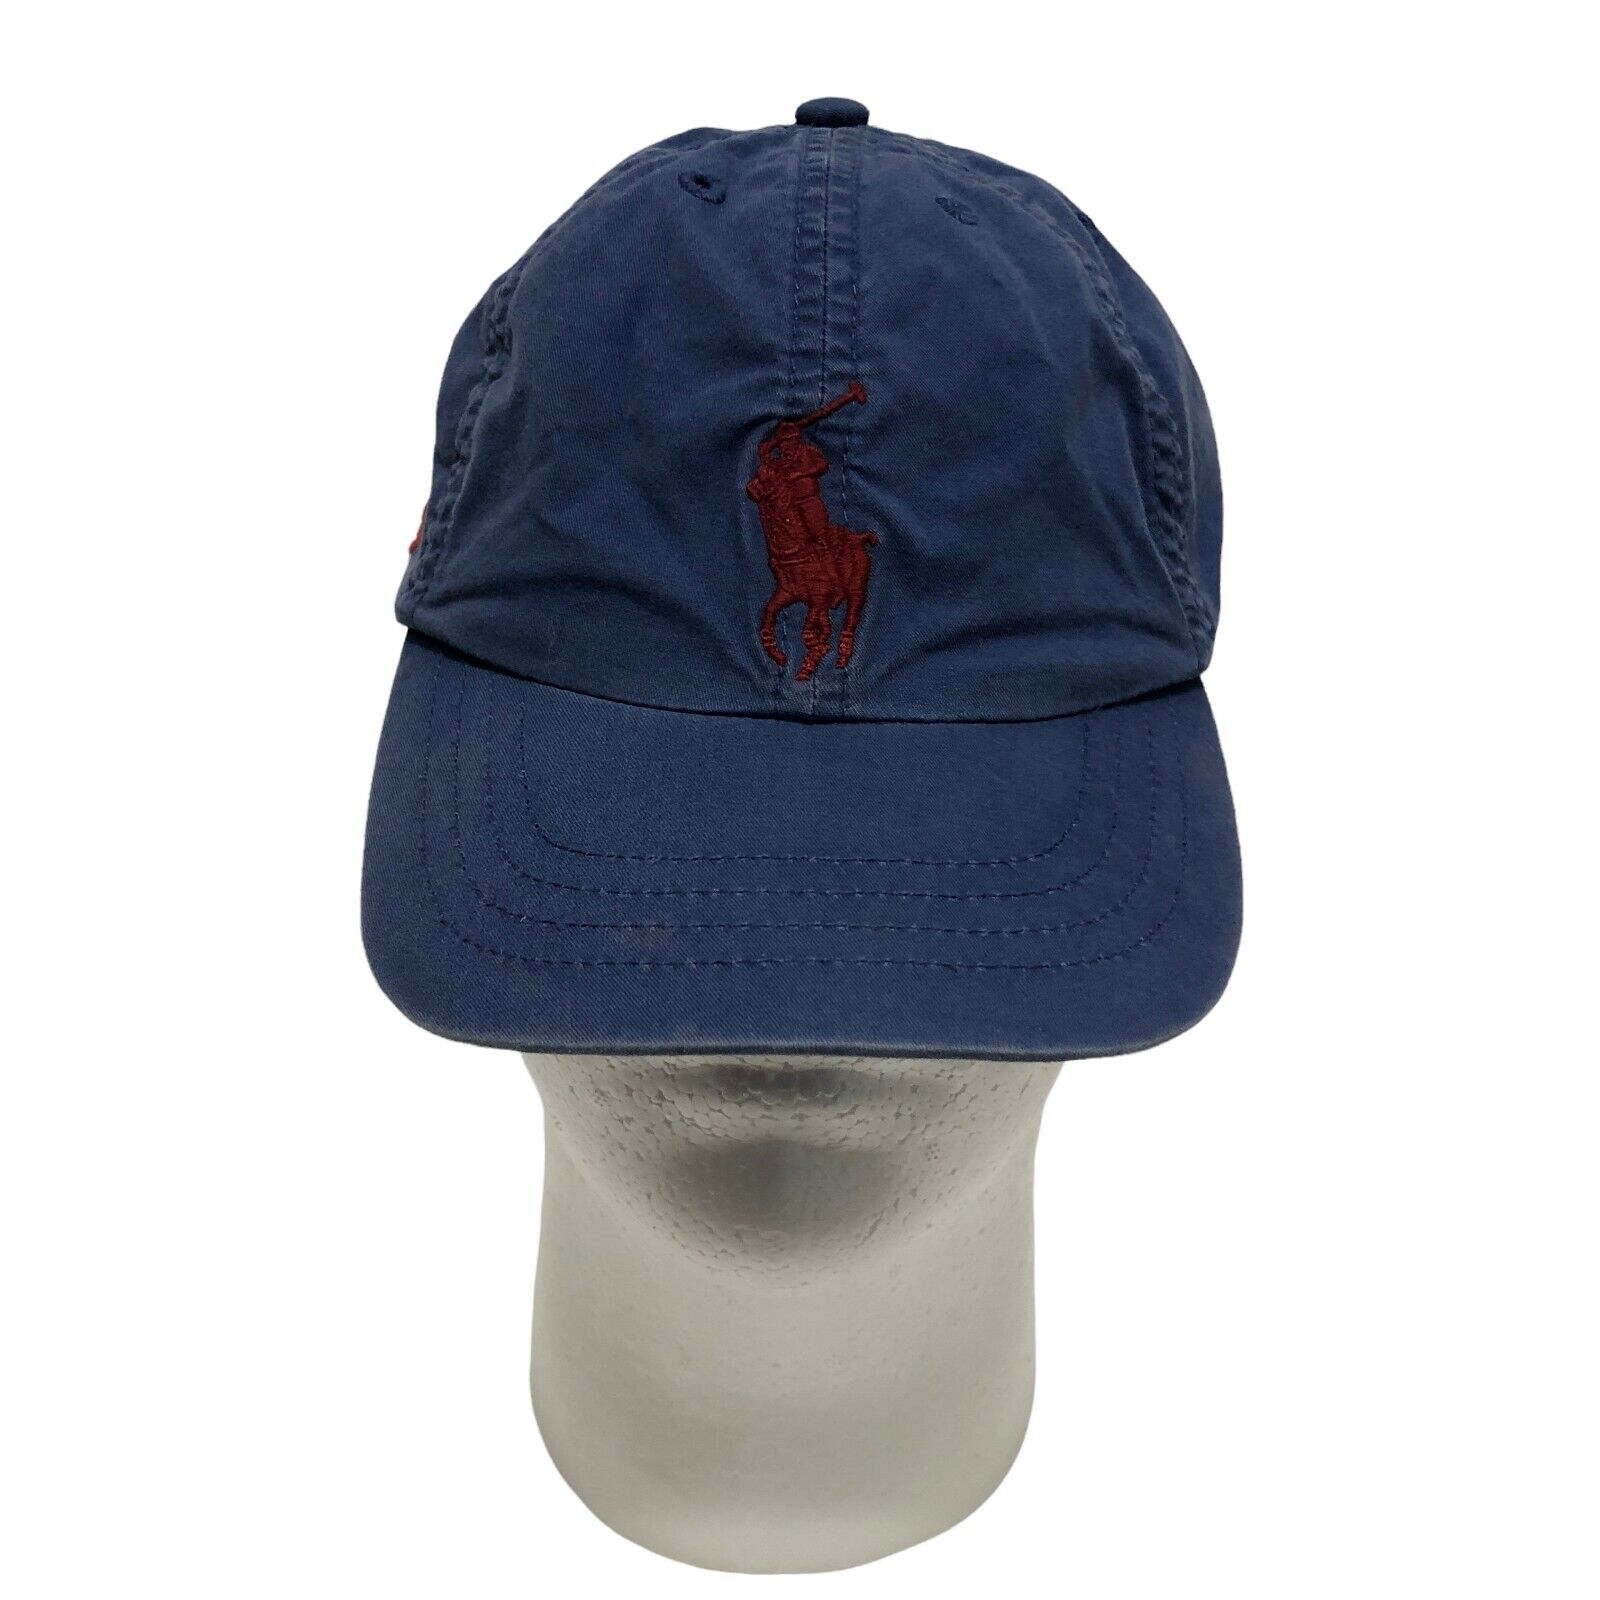 Polo Ralph Lauren One Size 4-7 Boys Hat Cat Distressed Blue Red Large Pony